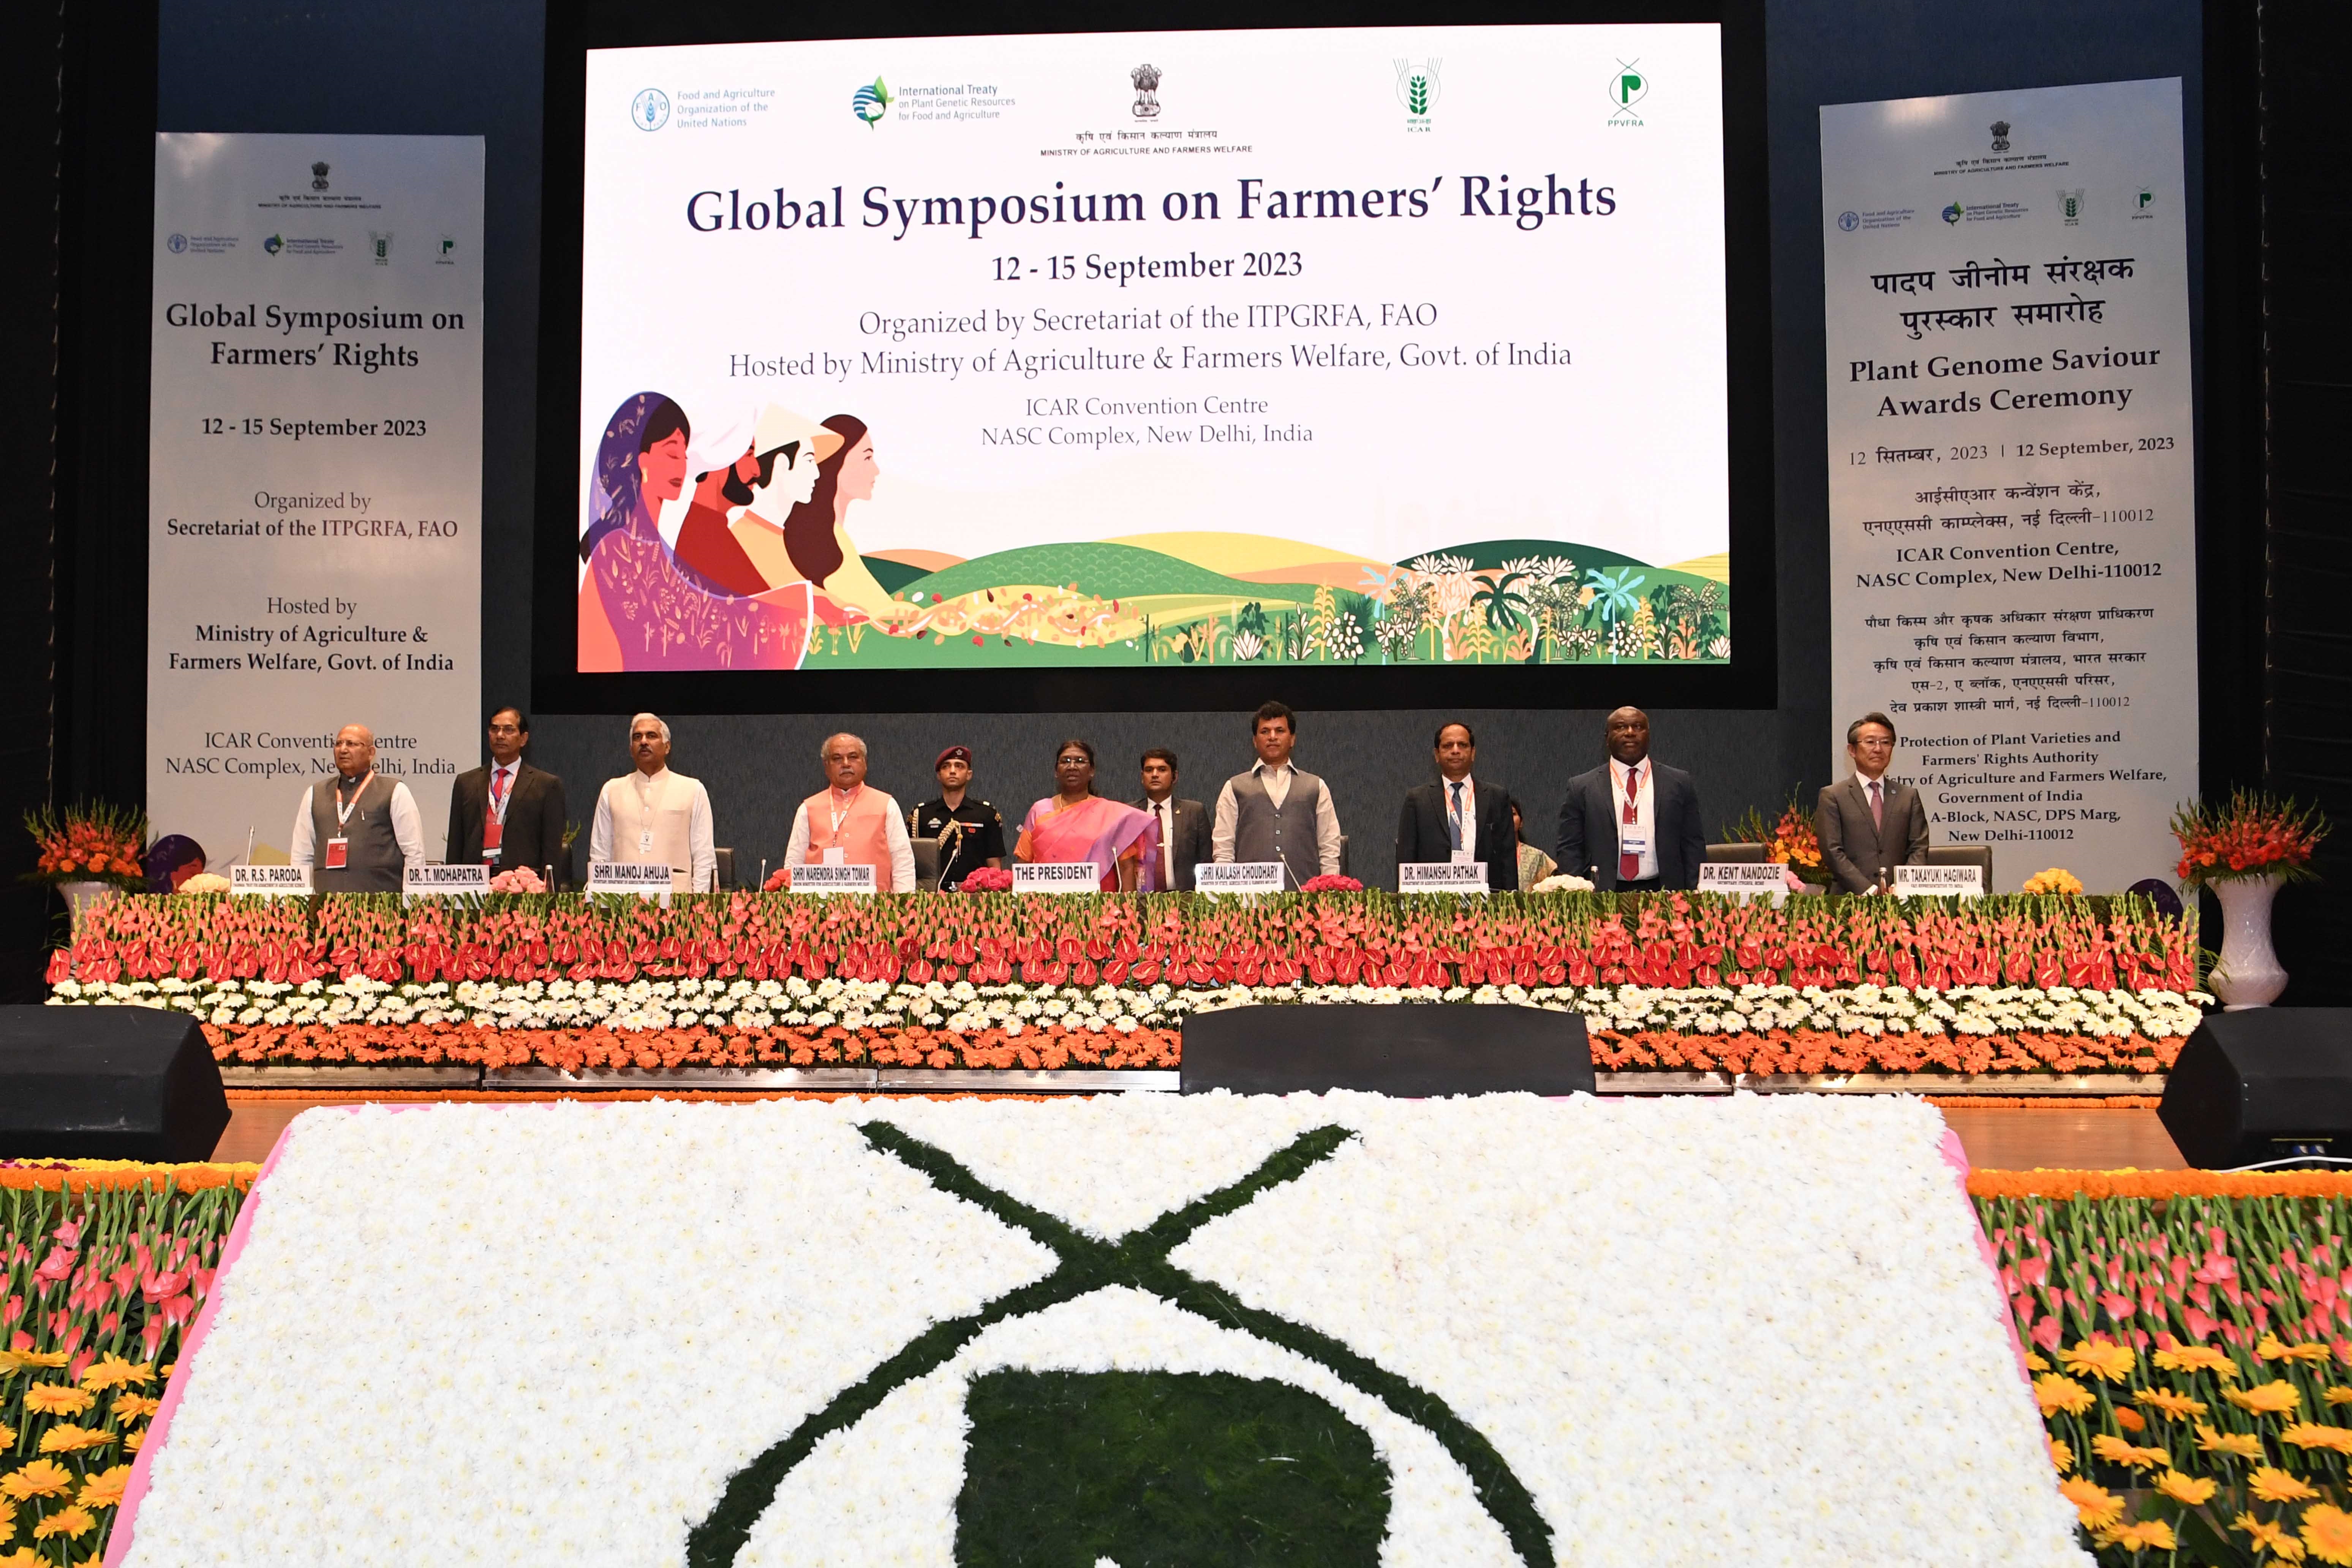 The President of India, Smt Droupadi Murmu inaugurating the First Global Symposium on Farmers' Rights in New Delhi, on September 12, 2023.